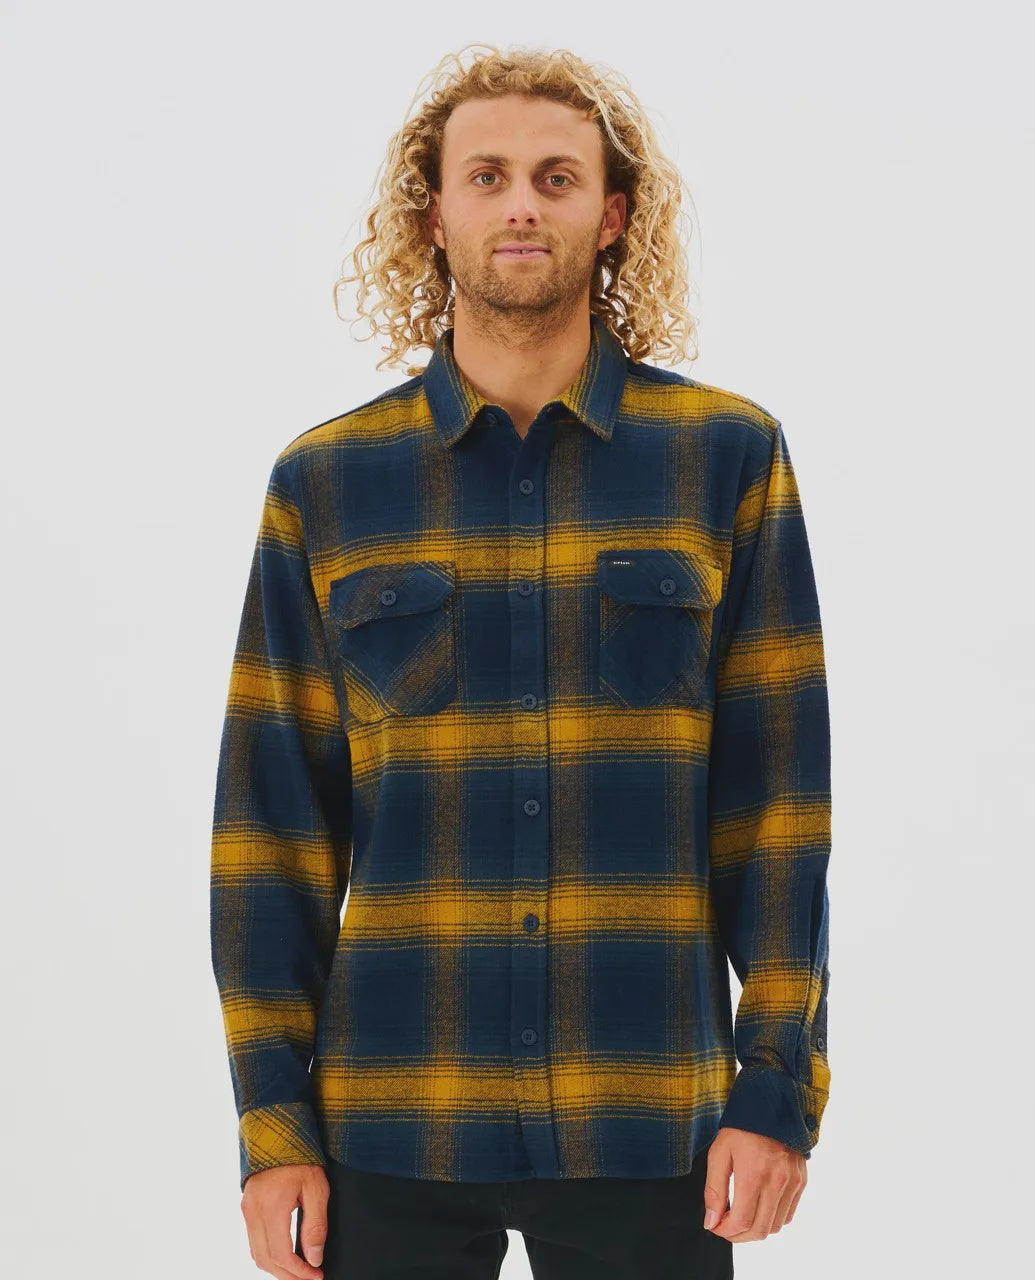 Count Flannel Shirt